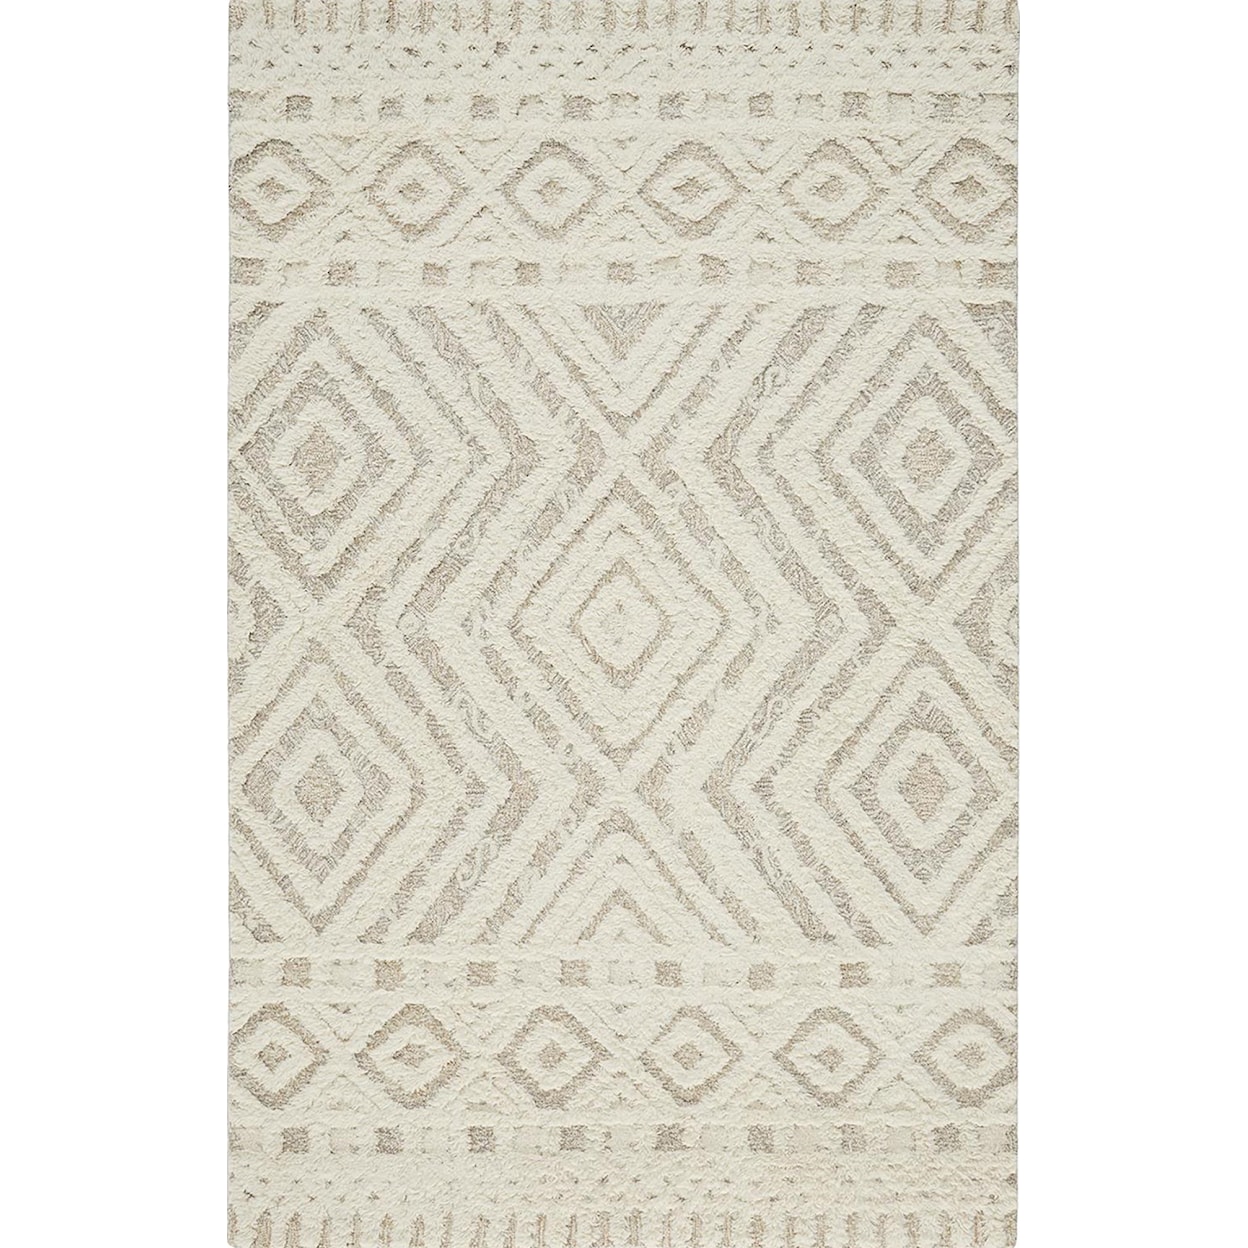 Feizy Rugs Anica 5 x 8 Area Rug